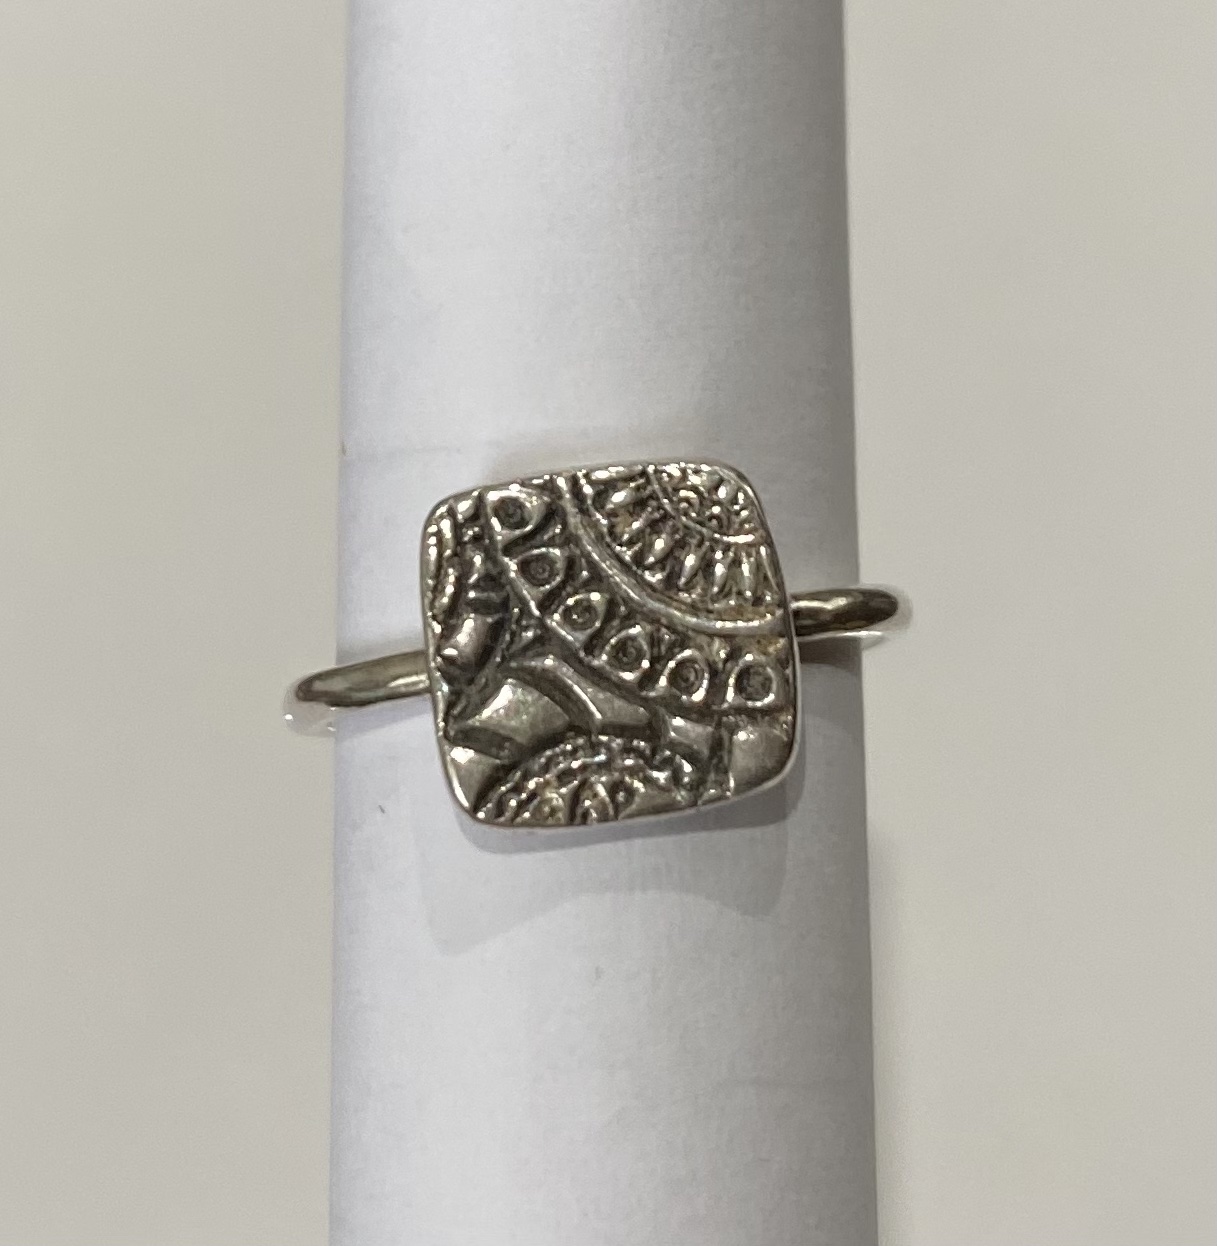 Square PMC Ring EM 118
Sterling Silver
Size 6
$30.